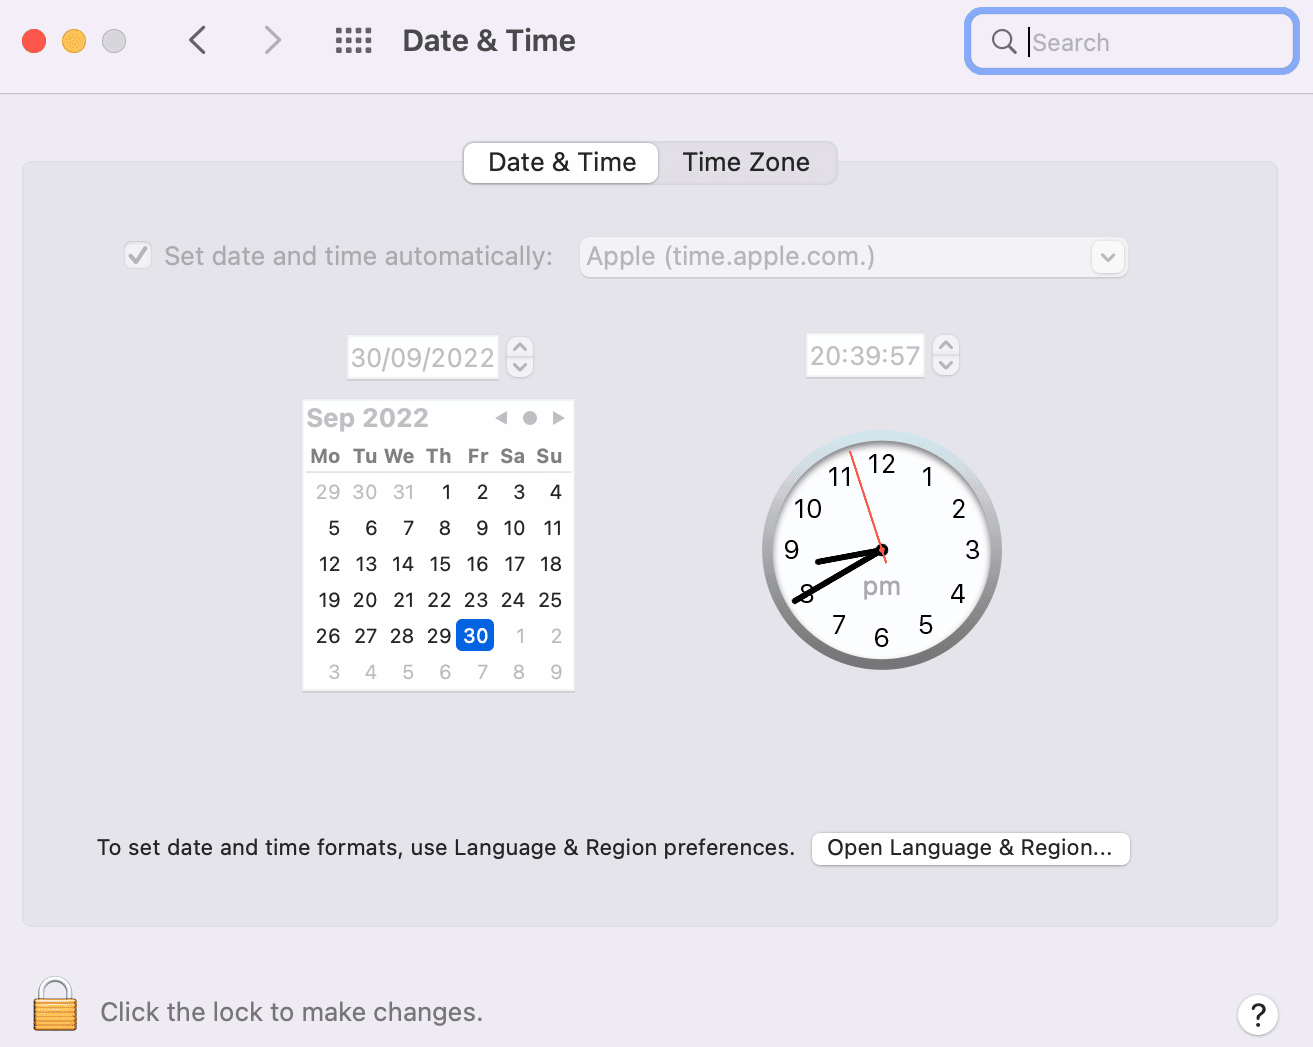 Making changes to the date and time on Mac